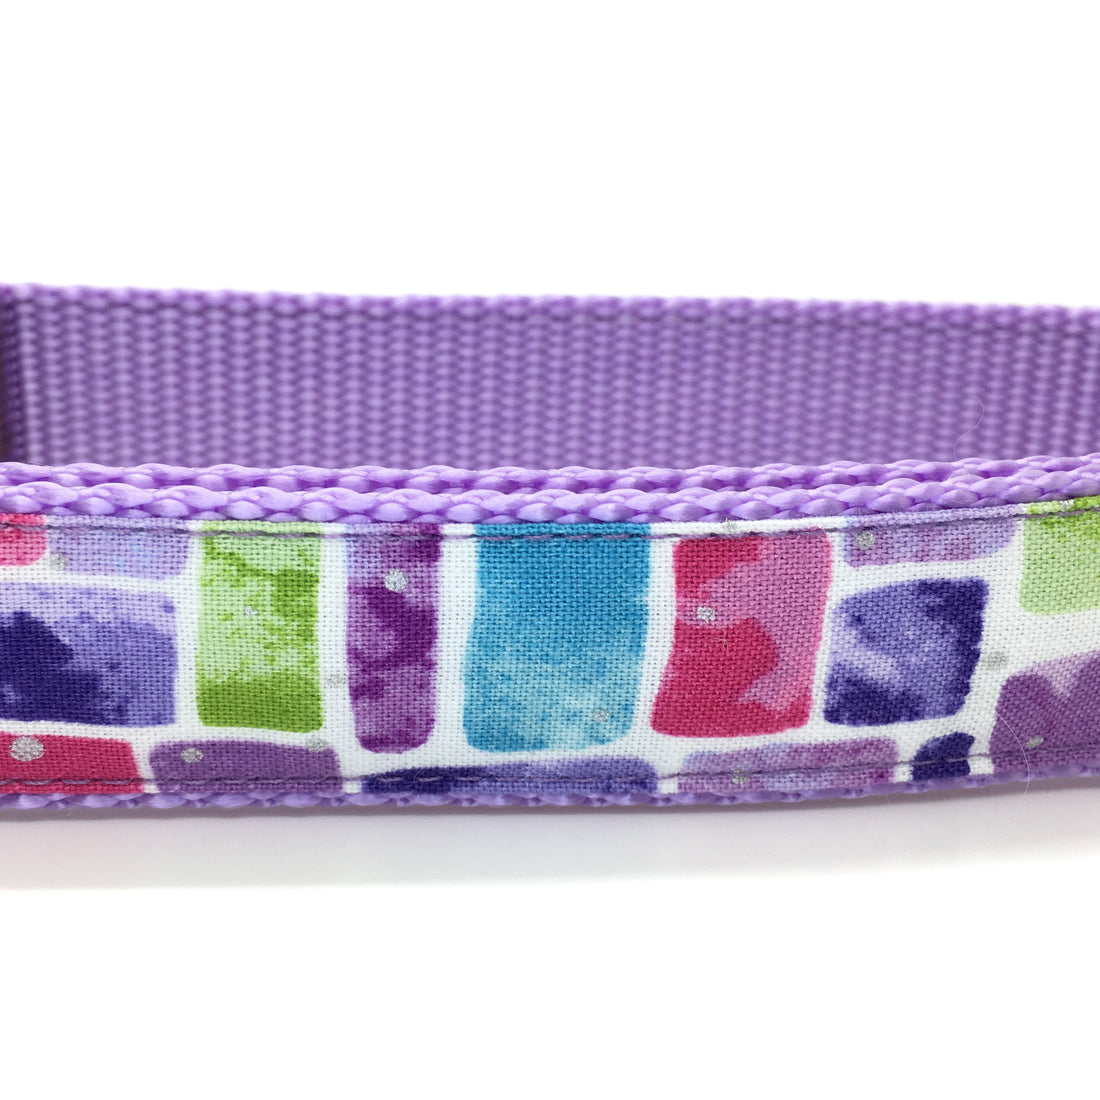 Persnickety Pets: Stained glass classic dog collar detail